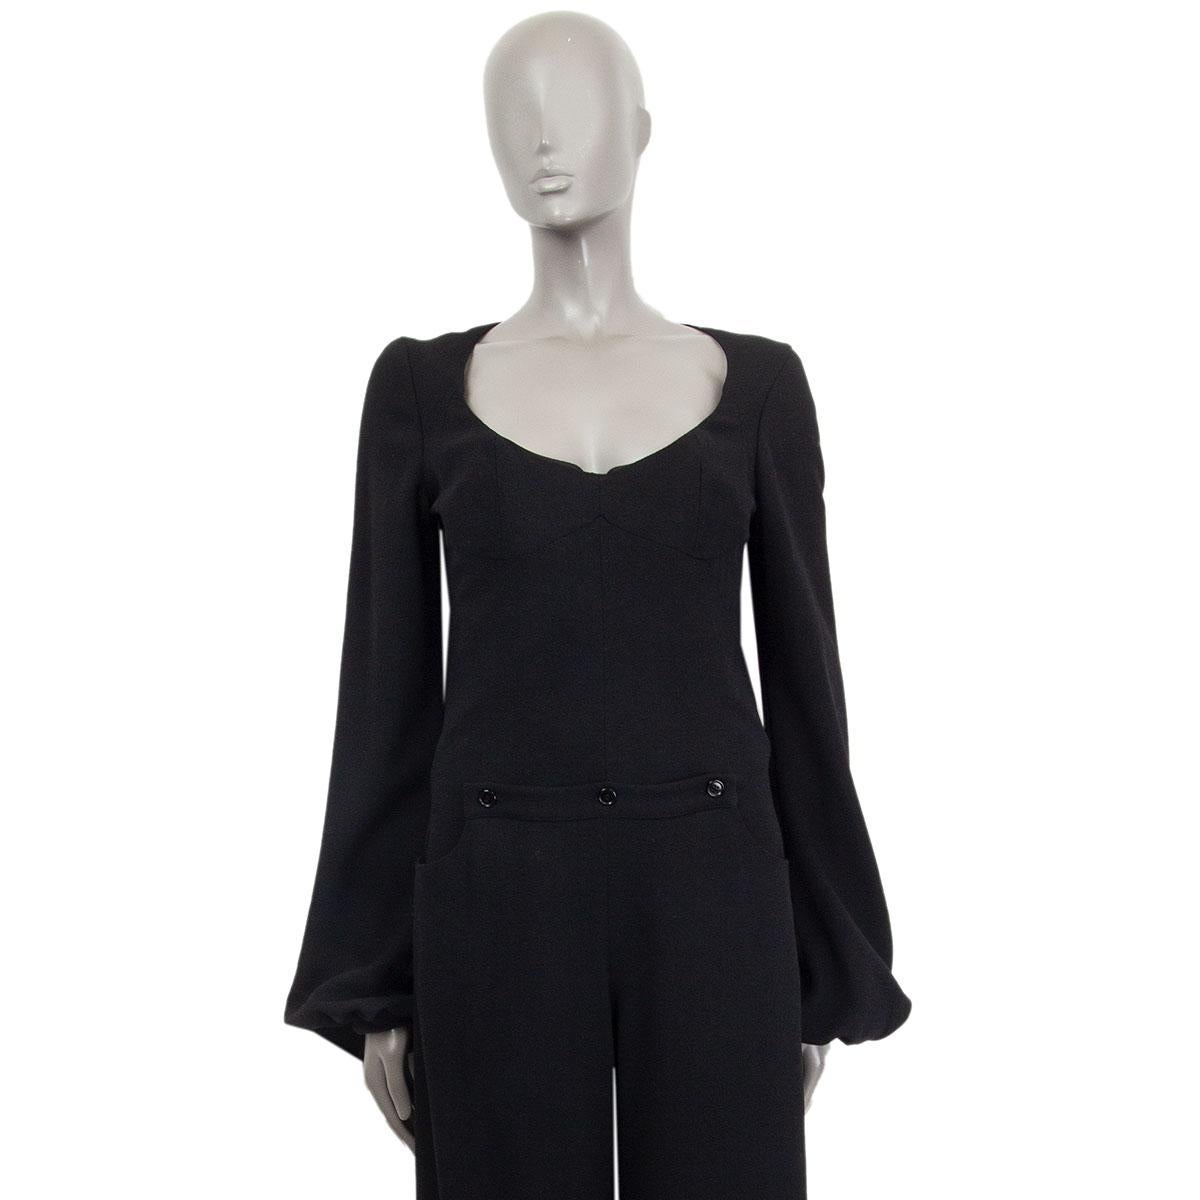 authentic Alexander McQueen wide-leg jumpsuit in black wool (85%) rayon (9%)  cotton (4%) silk (2%) with an attached bustier, kangaroo-pocket in the front, and bell-sleeves. Lined in black silk (100%). Closes with a concealed zipper in the back. Has